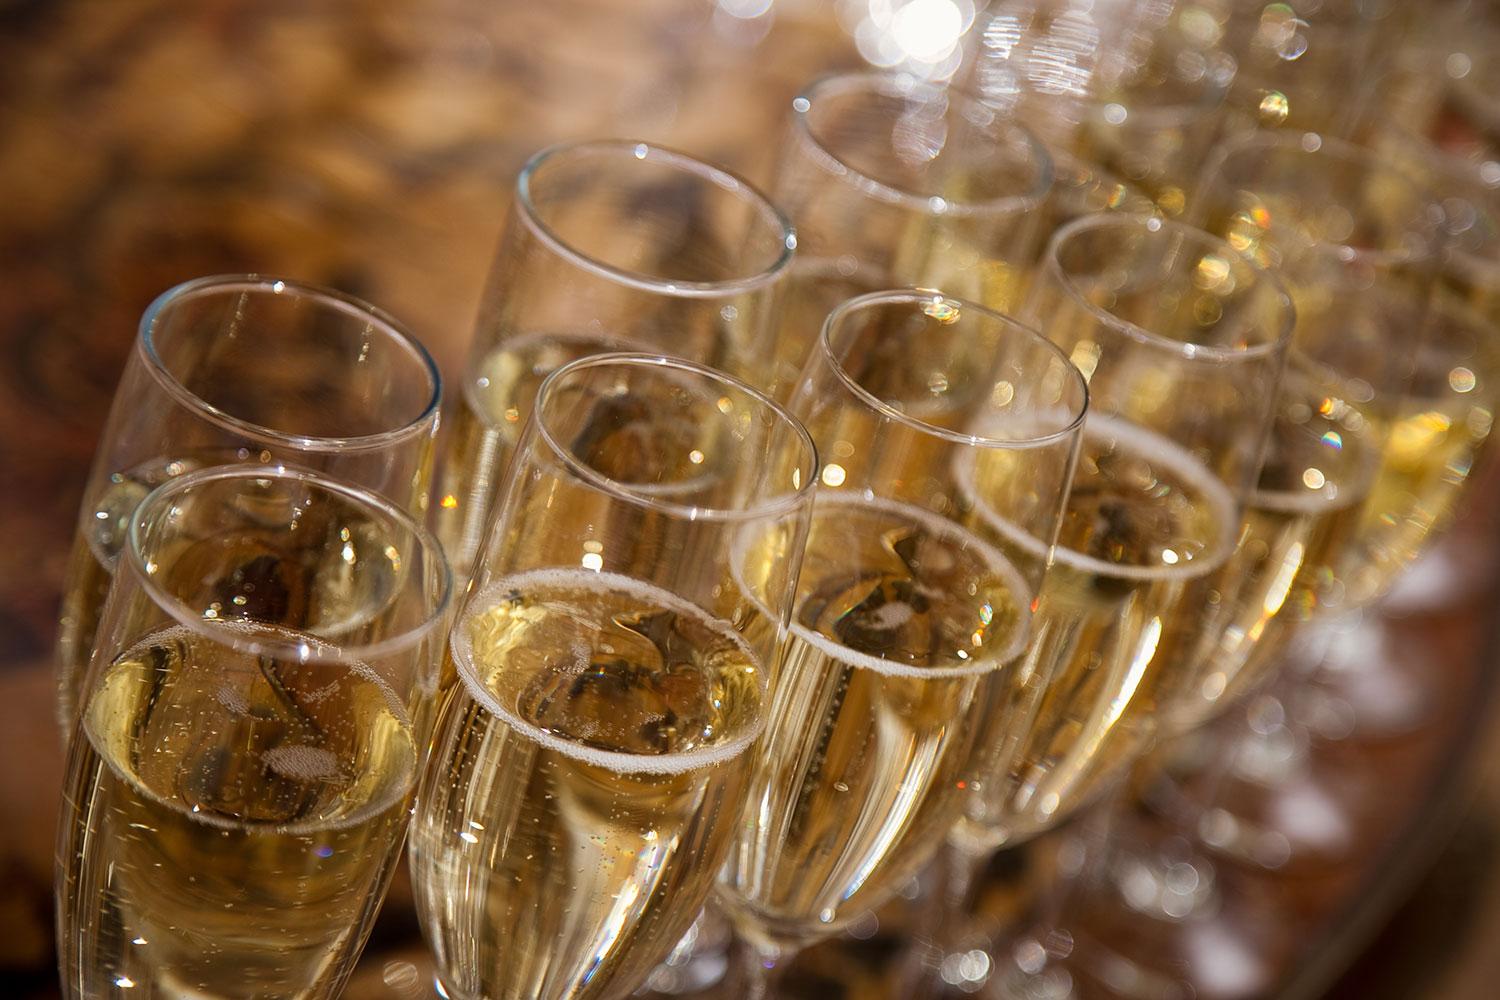 Pro tips on how to serve & enjoy Champagne